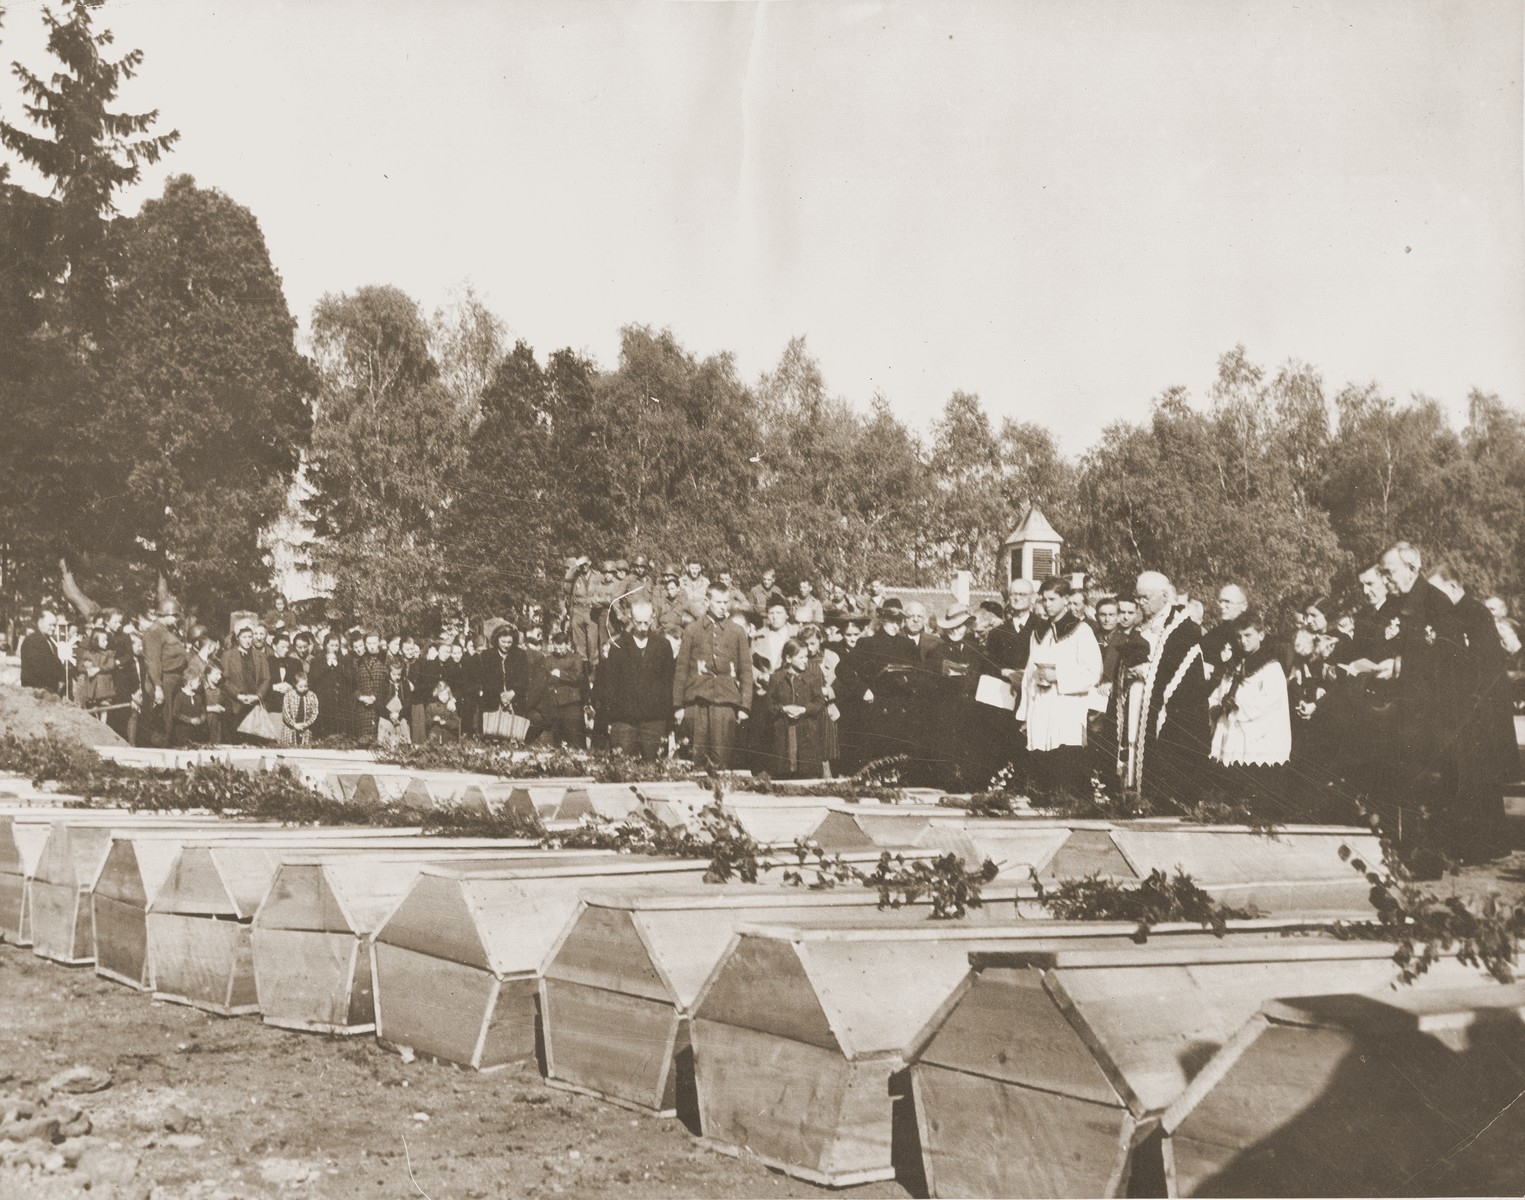 German civilians attend funeral services conducted by the pastor of Schwarzenfeld for the 140 Russian, Hungarian, and Polish Jews exhumed from a mass grave near the town.  

The victims died while on an evacuation transport from the Flossenbuerg concentration camp.

The original Signal Corps caption reads, "THIRD U.S. ARMY DISCOVERS NAZI ATROCITY.  When troops of the 26th Infantry Division, Third U.S. Army, captured Schwarzenfeld, Germany, April 22, 1945, another story of Nazi murder and atrocity was revealed.  The Americans discovered that many hundreds of helpless persons, including Allied prisoners-of-war and Polish Jewish slave laborers, had been shot in cold blood by Nazi SS troops, and their bodies thrown into a mass grave.  The executions took place on the day before the American forces captured the town.  After making official record of the circumstances, U.S. Military Government officers ordered local German civilians to exhume the bodies and provide coffins and a civilized burial for the victims.  Schwarzenfeld is 47 miles east of Nuremburg and 28 miles west of the Czechoslovakian border.

BIPPA                                                        EA 64388

THIS PHOTO SHOWS:  Approximately 500 German civilians and a group of Third Army soldiers attend burial services for the victims.  The German pastor conducting the services said local residents were unaware of the atrocity.  U.S. Signal Corps Photo ETO-HQ-45-34035.
SERVICED BY LONDON OWI TO LIST B
CERTIFIED AS PASSED BY SHAEF CENSOR